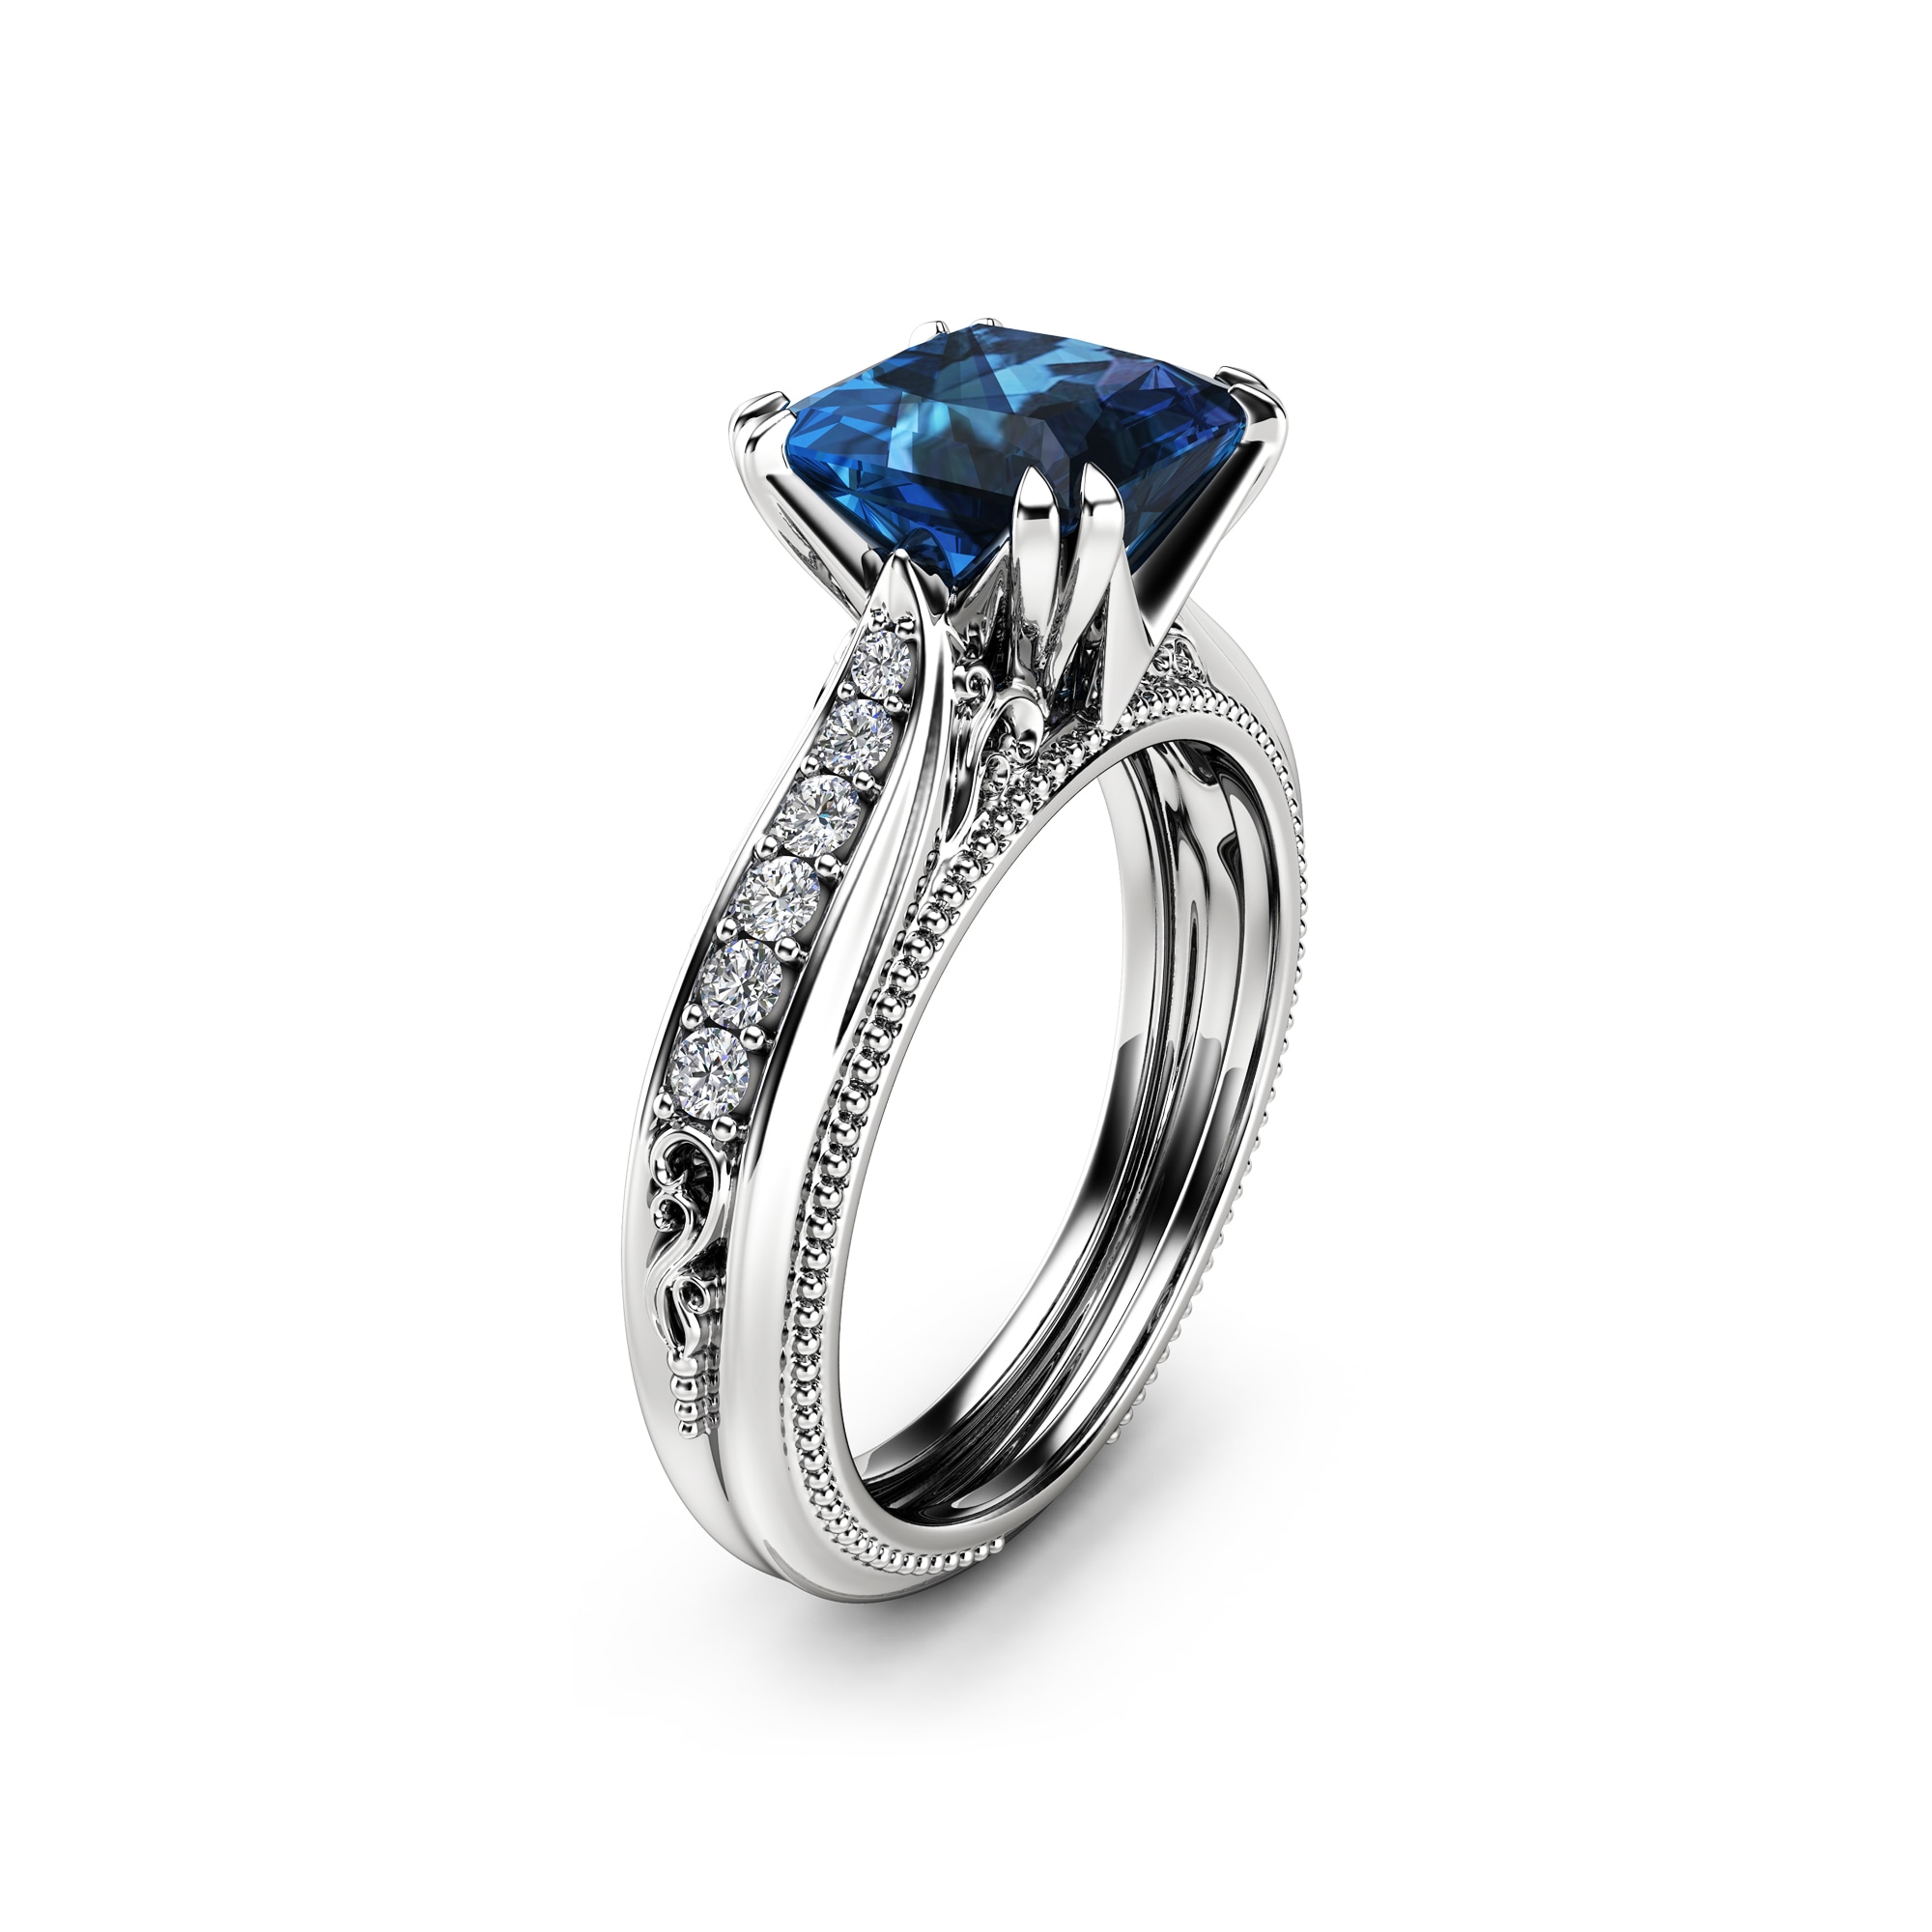 Regard Jewelry - TEXAS STAR CUT BLUE TOPAZ RING WITH HALO AT